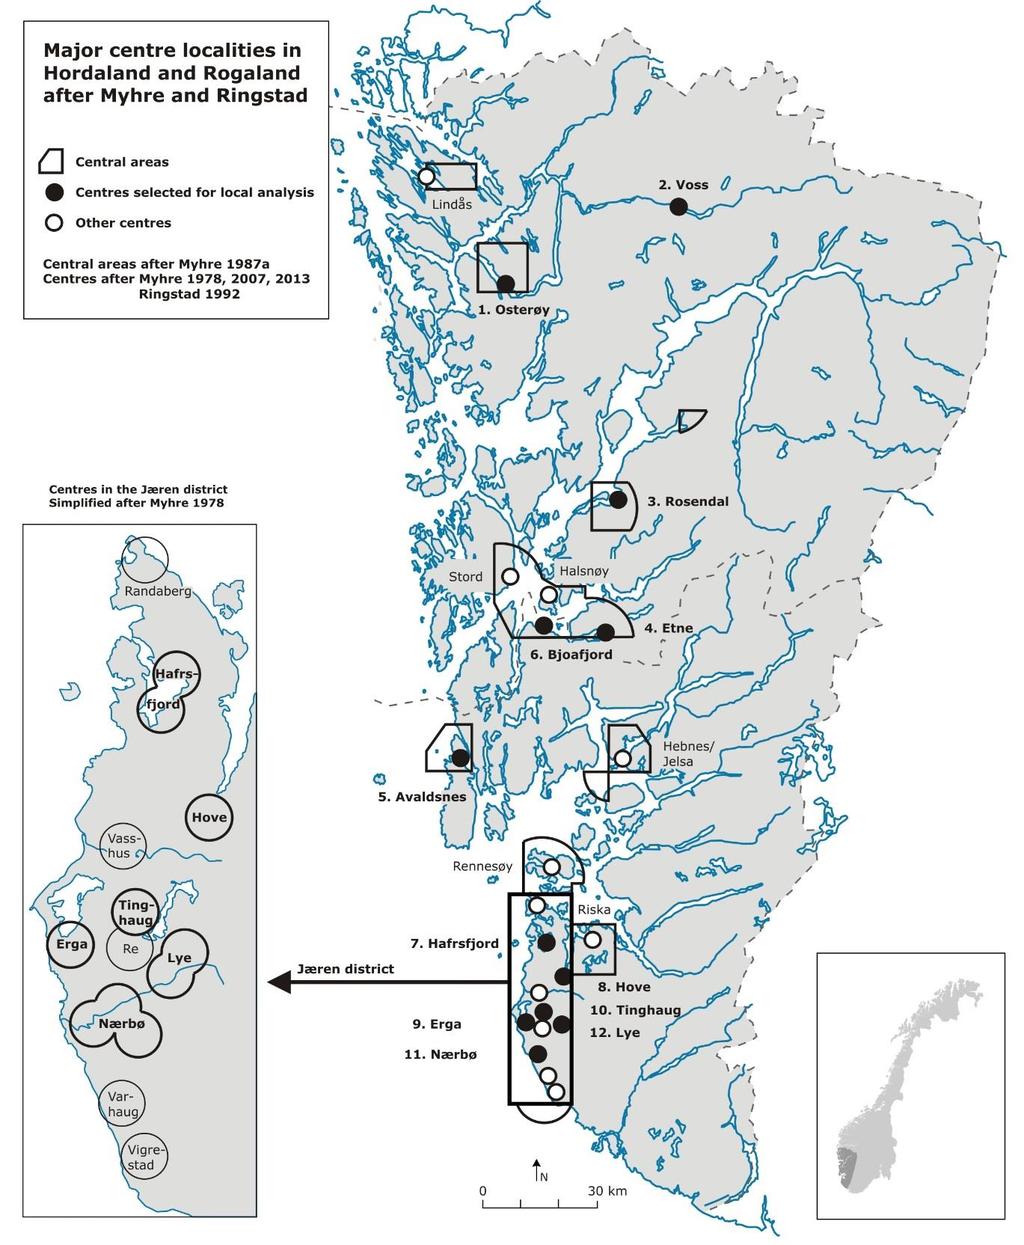 14 Fig. 1.4. Map of major centres in Hordaland and Rogaland, as identified by Myhre (1987a) and Ringstad (1992) (cf. Figs. 3.2 and 3.6).